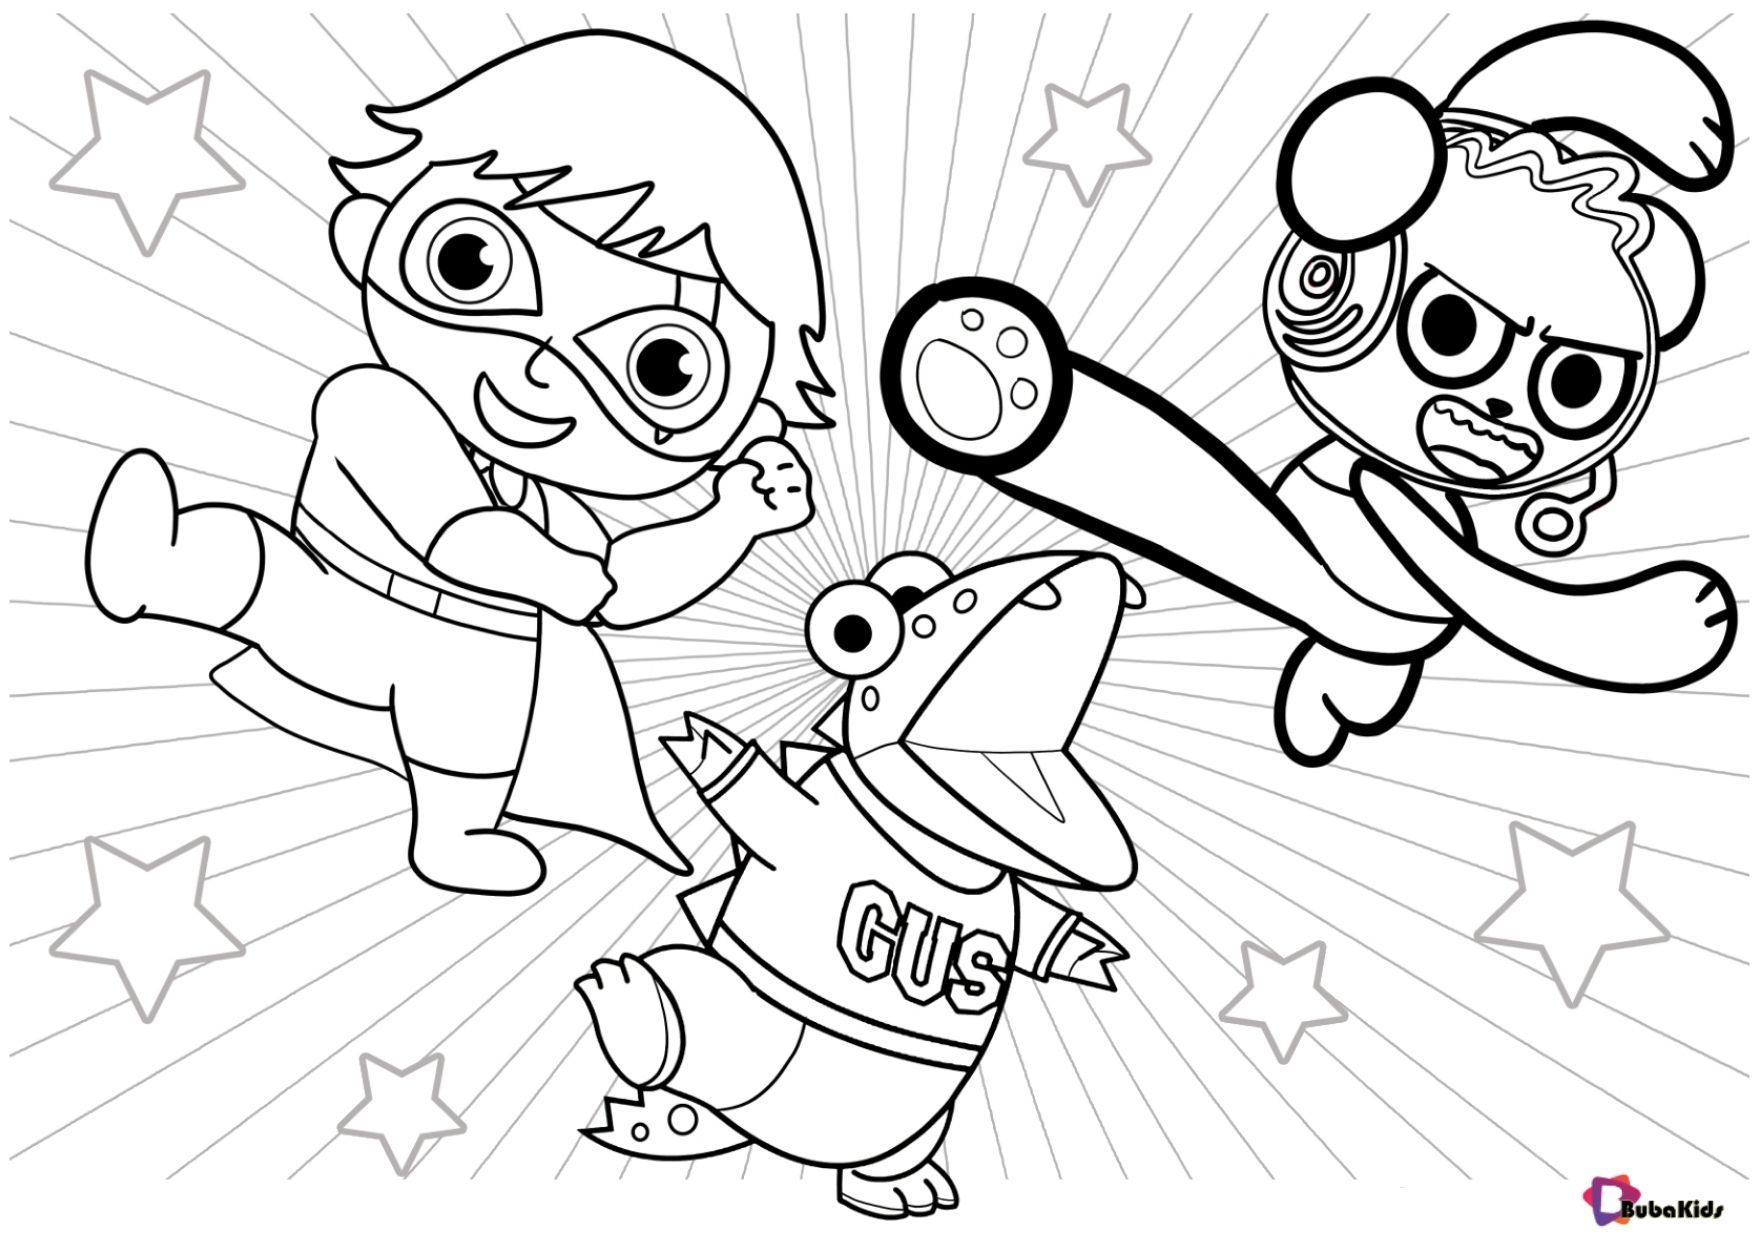 Ryan World Coloring Pages | Bunny coloring pages, Printable coloring pages,  Cartoon coloring pages